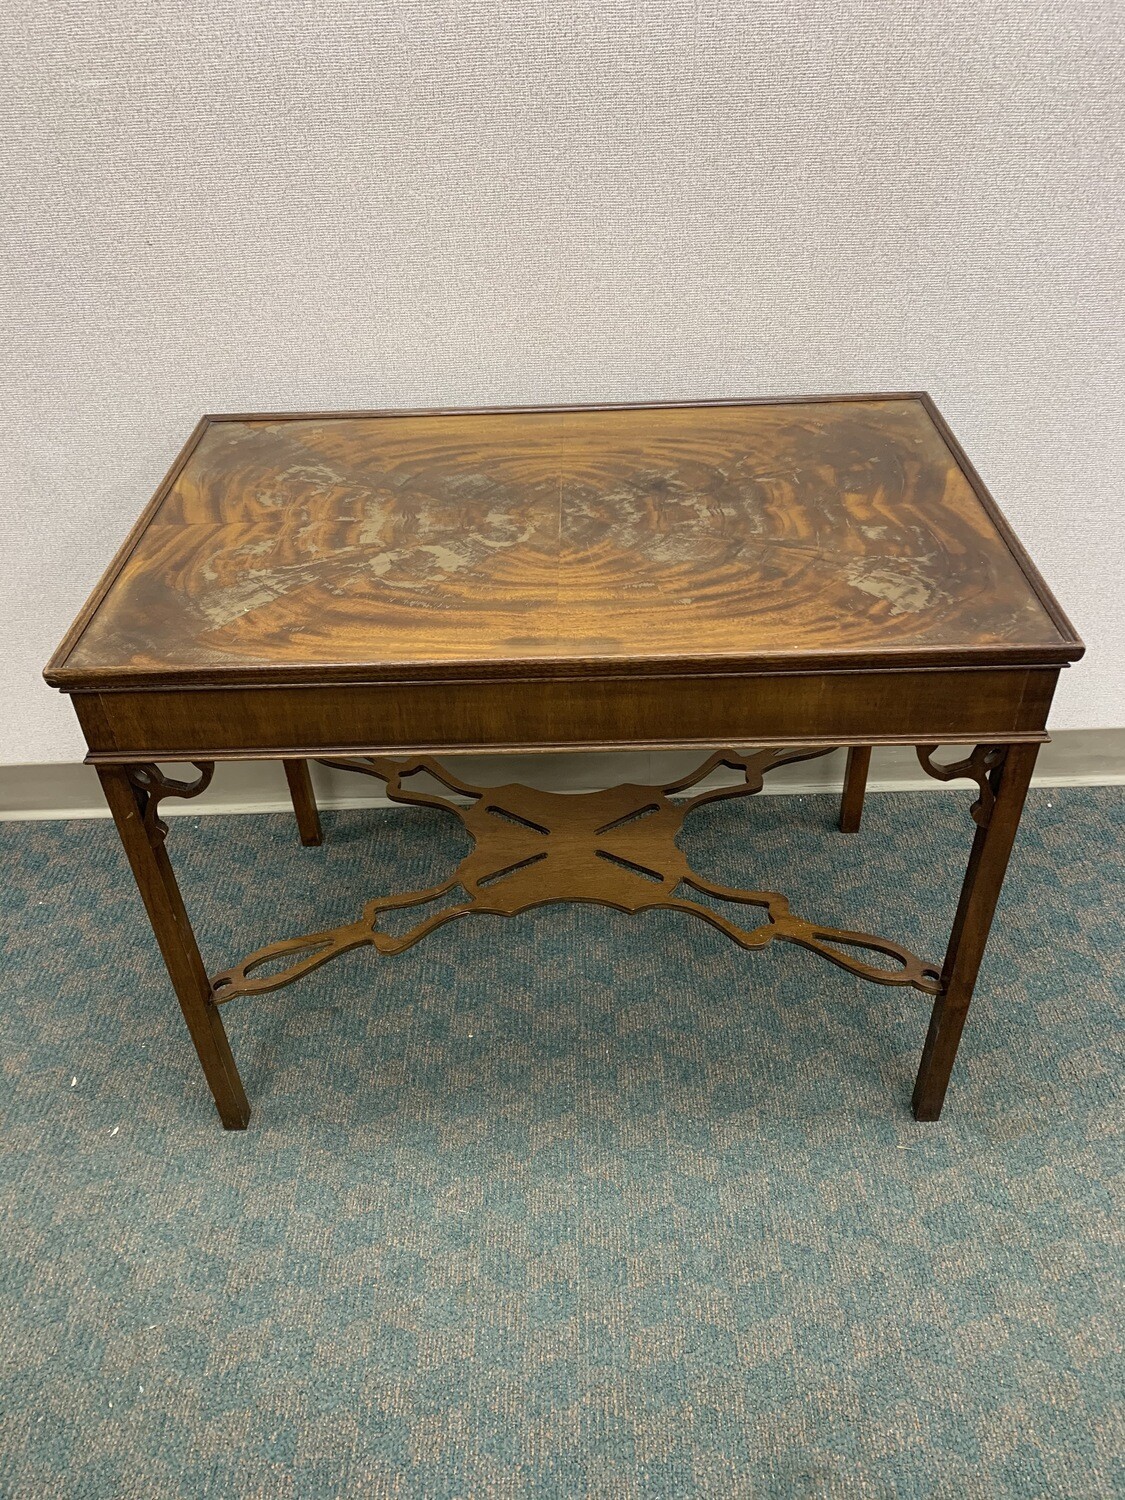 Council Craftsman Side Table